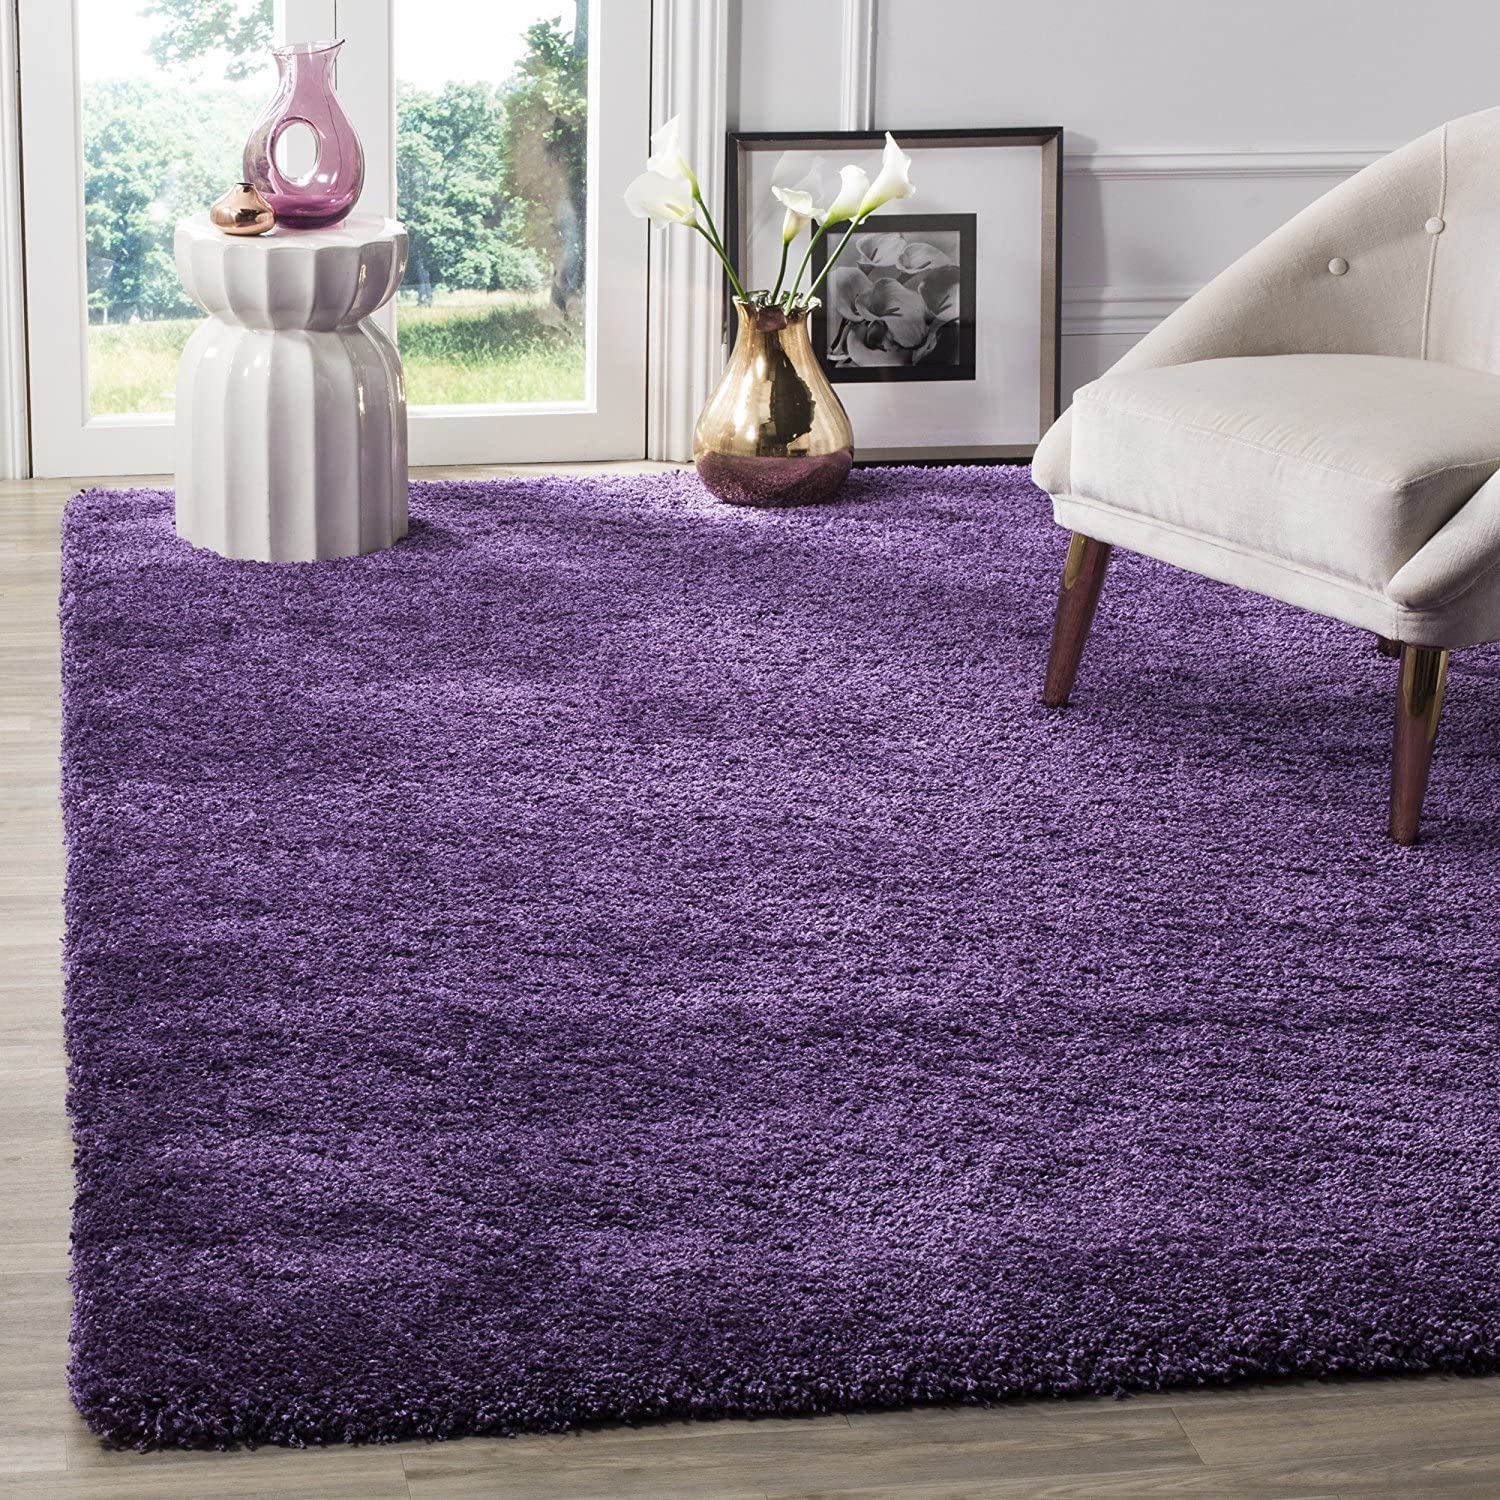 What Are the Best Uses of Shaggy Rugs in the Home?